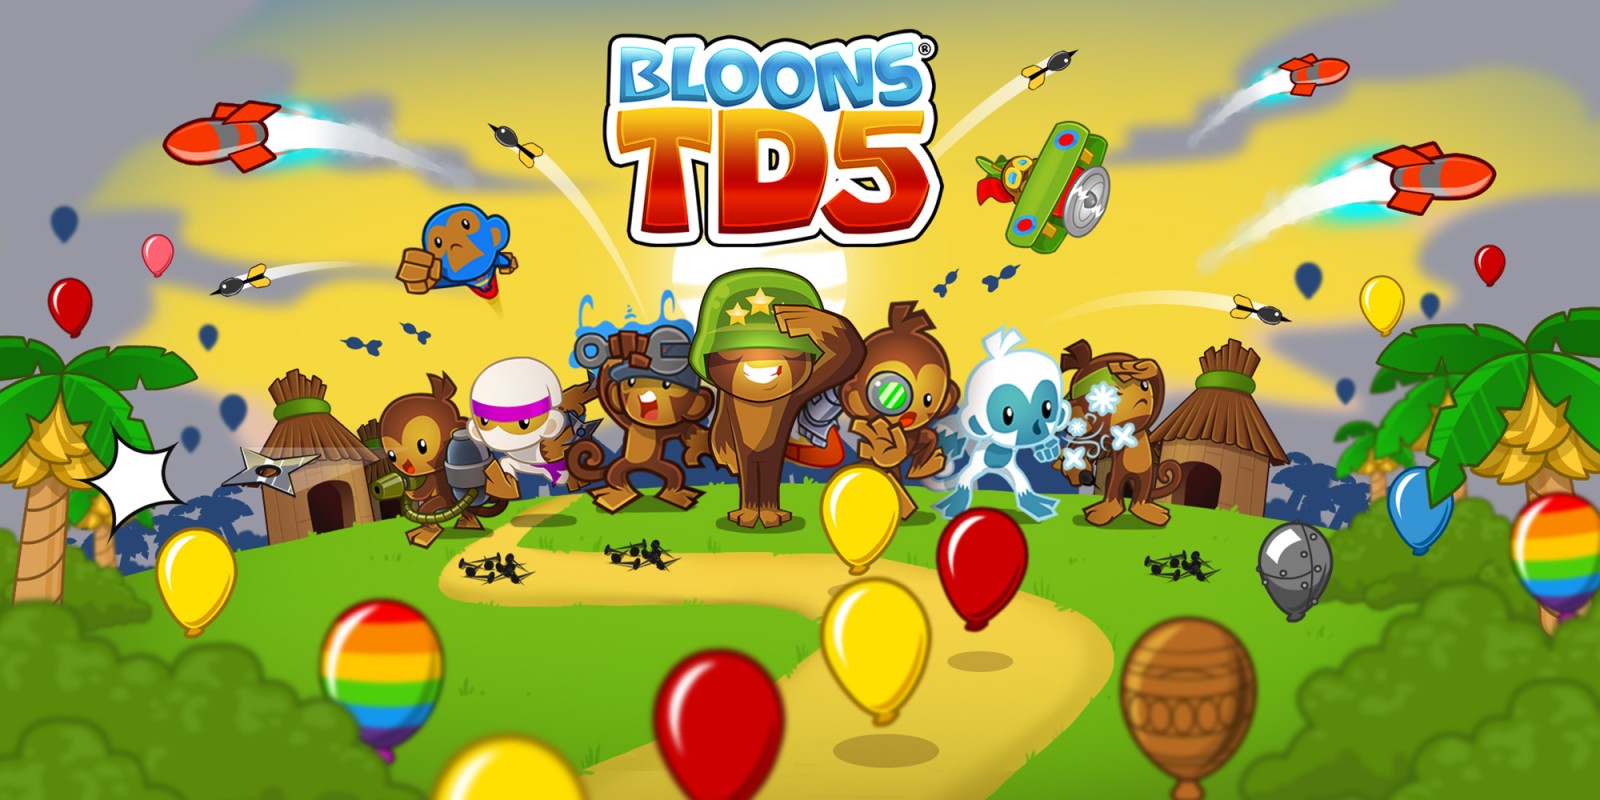 bloons td 5 apk pc